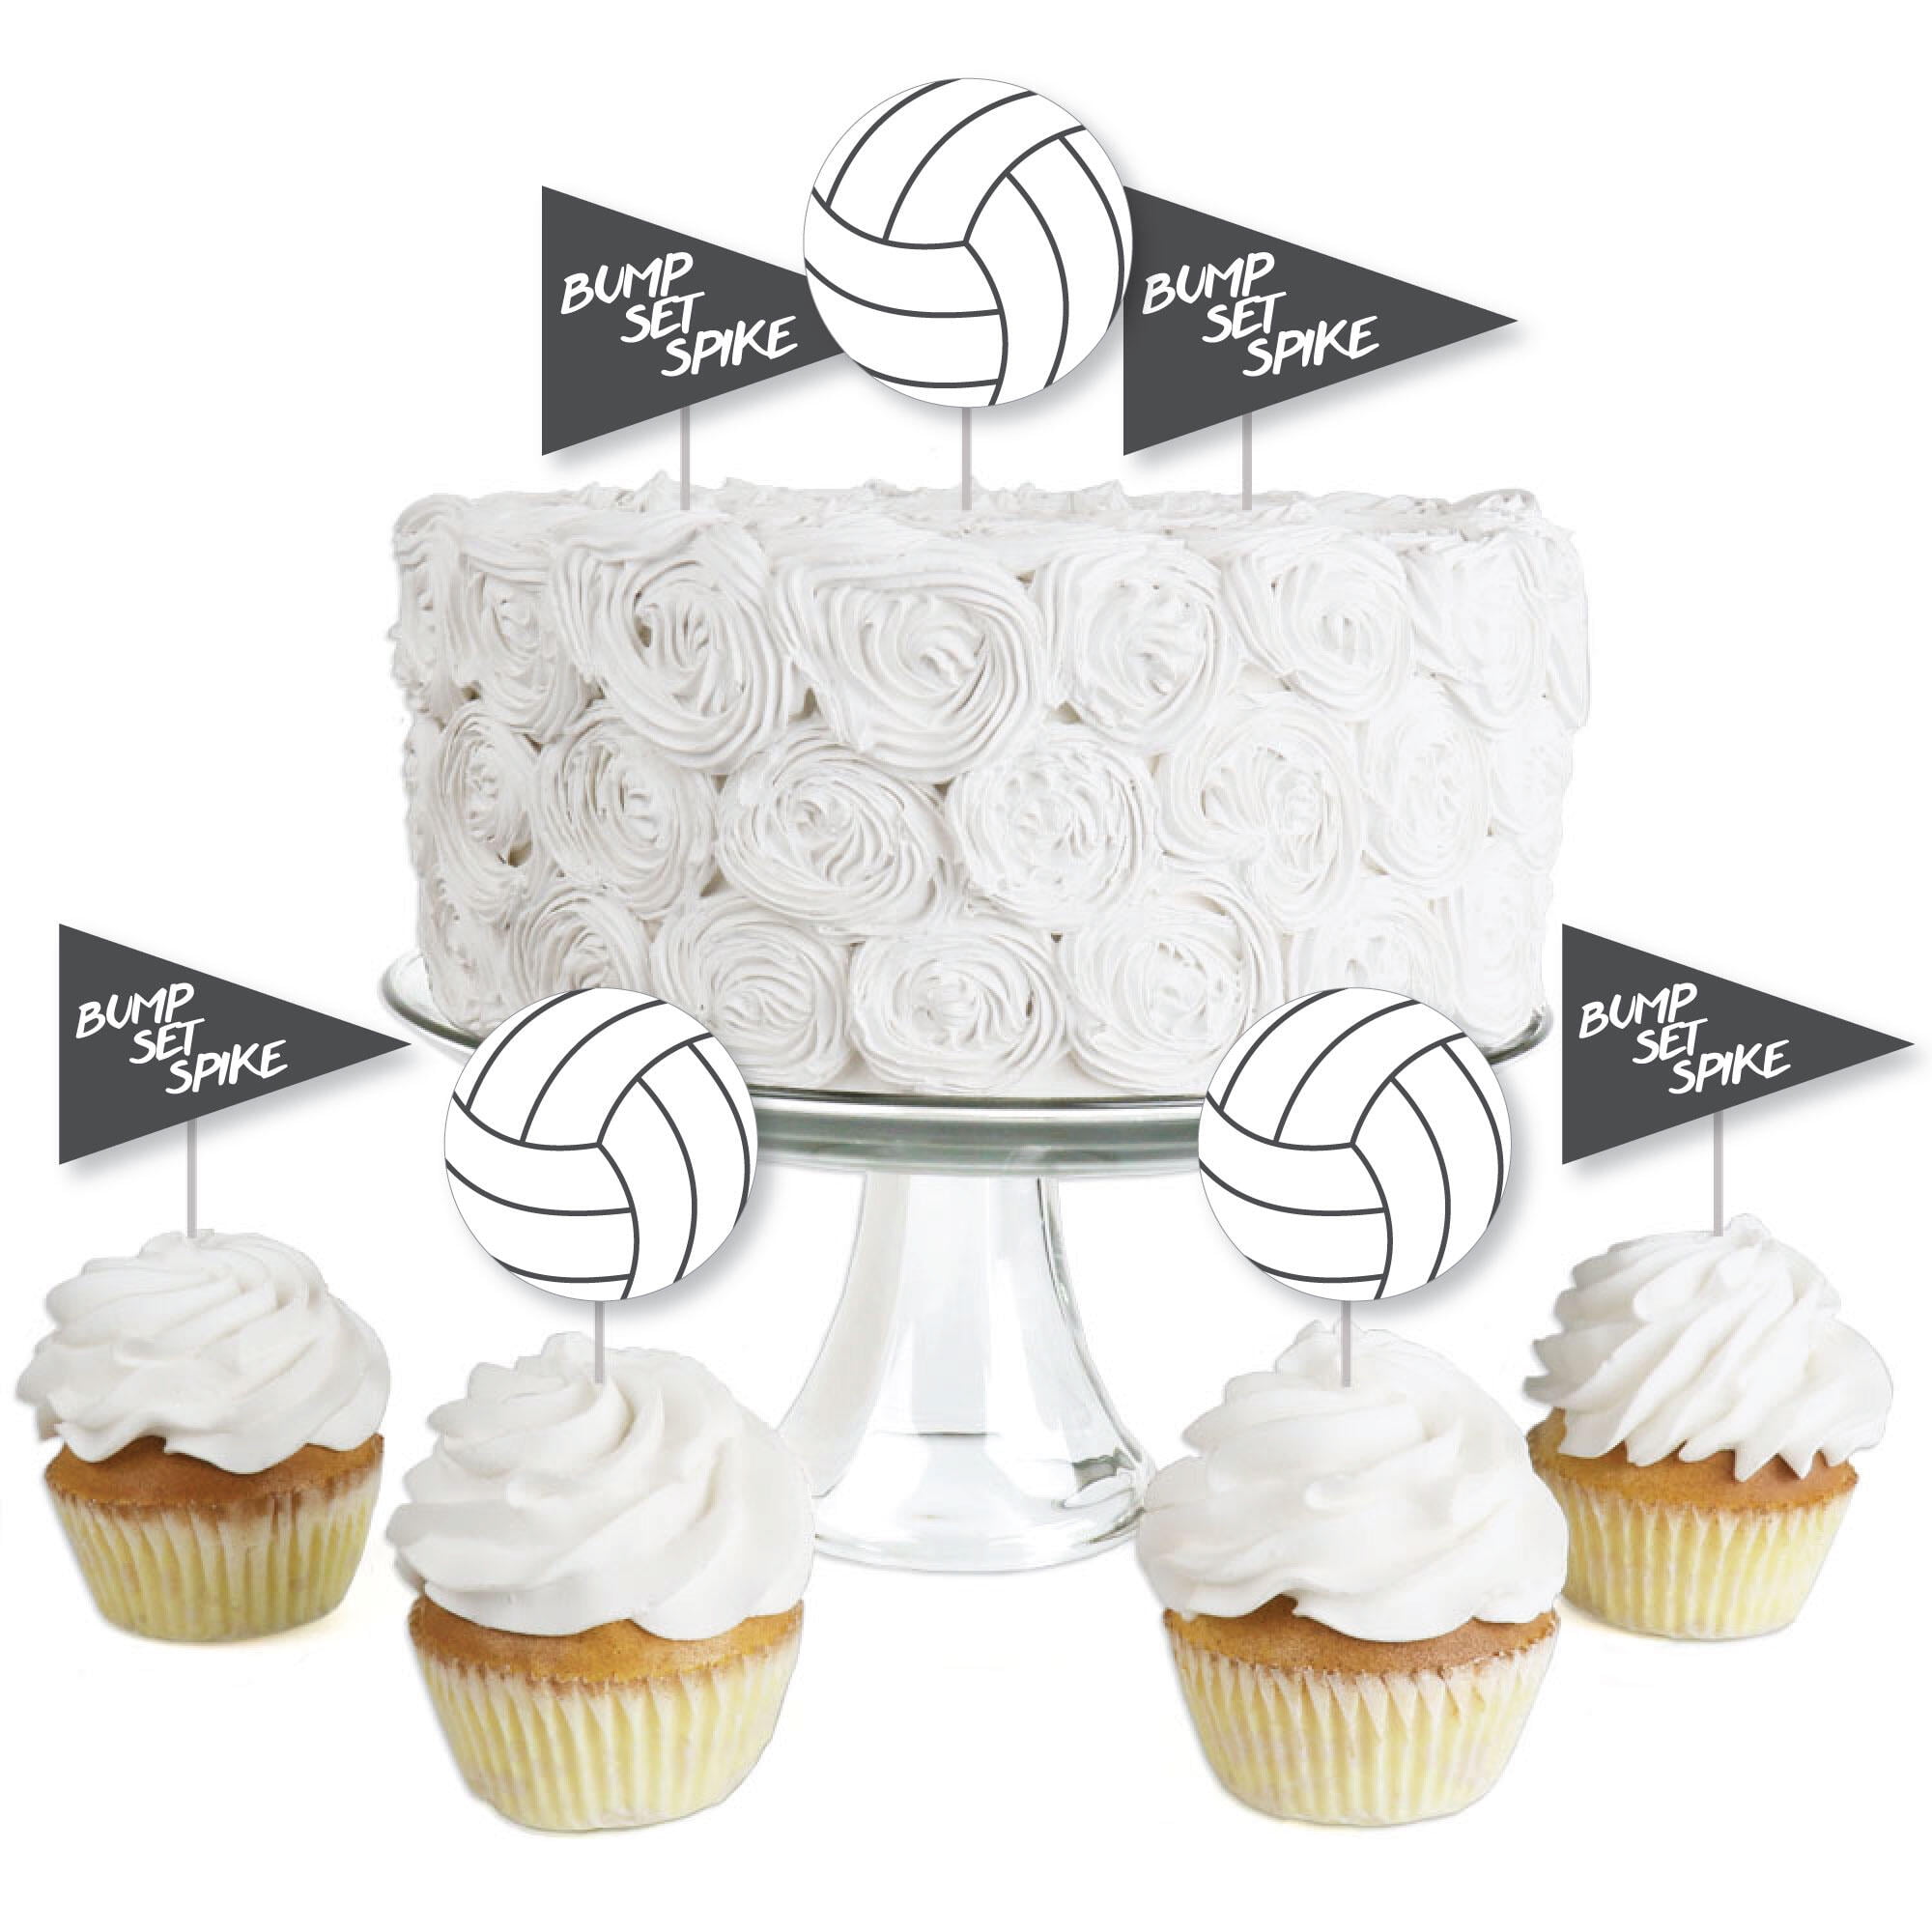 White Glitter Cupcake Wrappers Mini Dessert Holders Birthday Party Decorations Set of 12